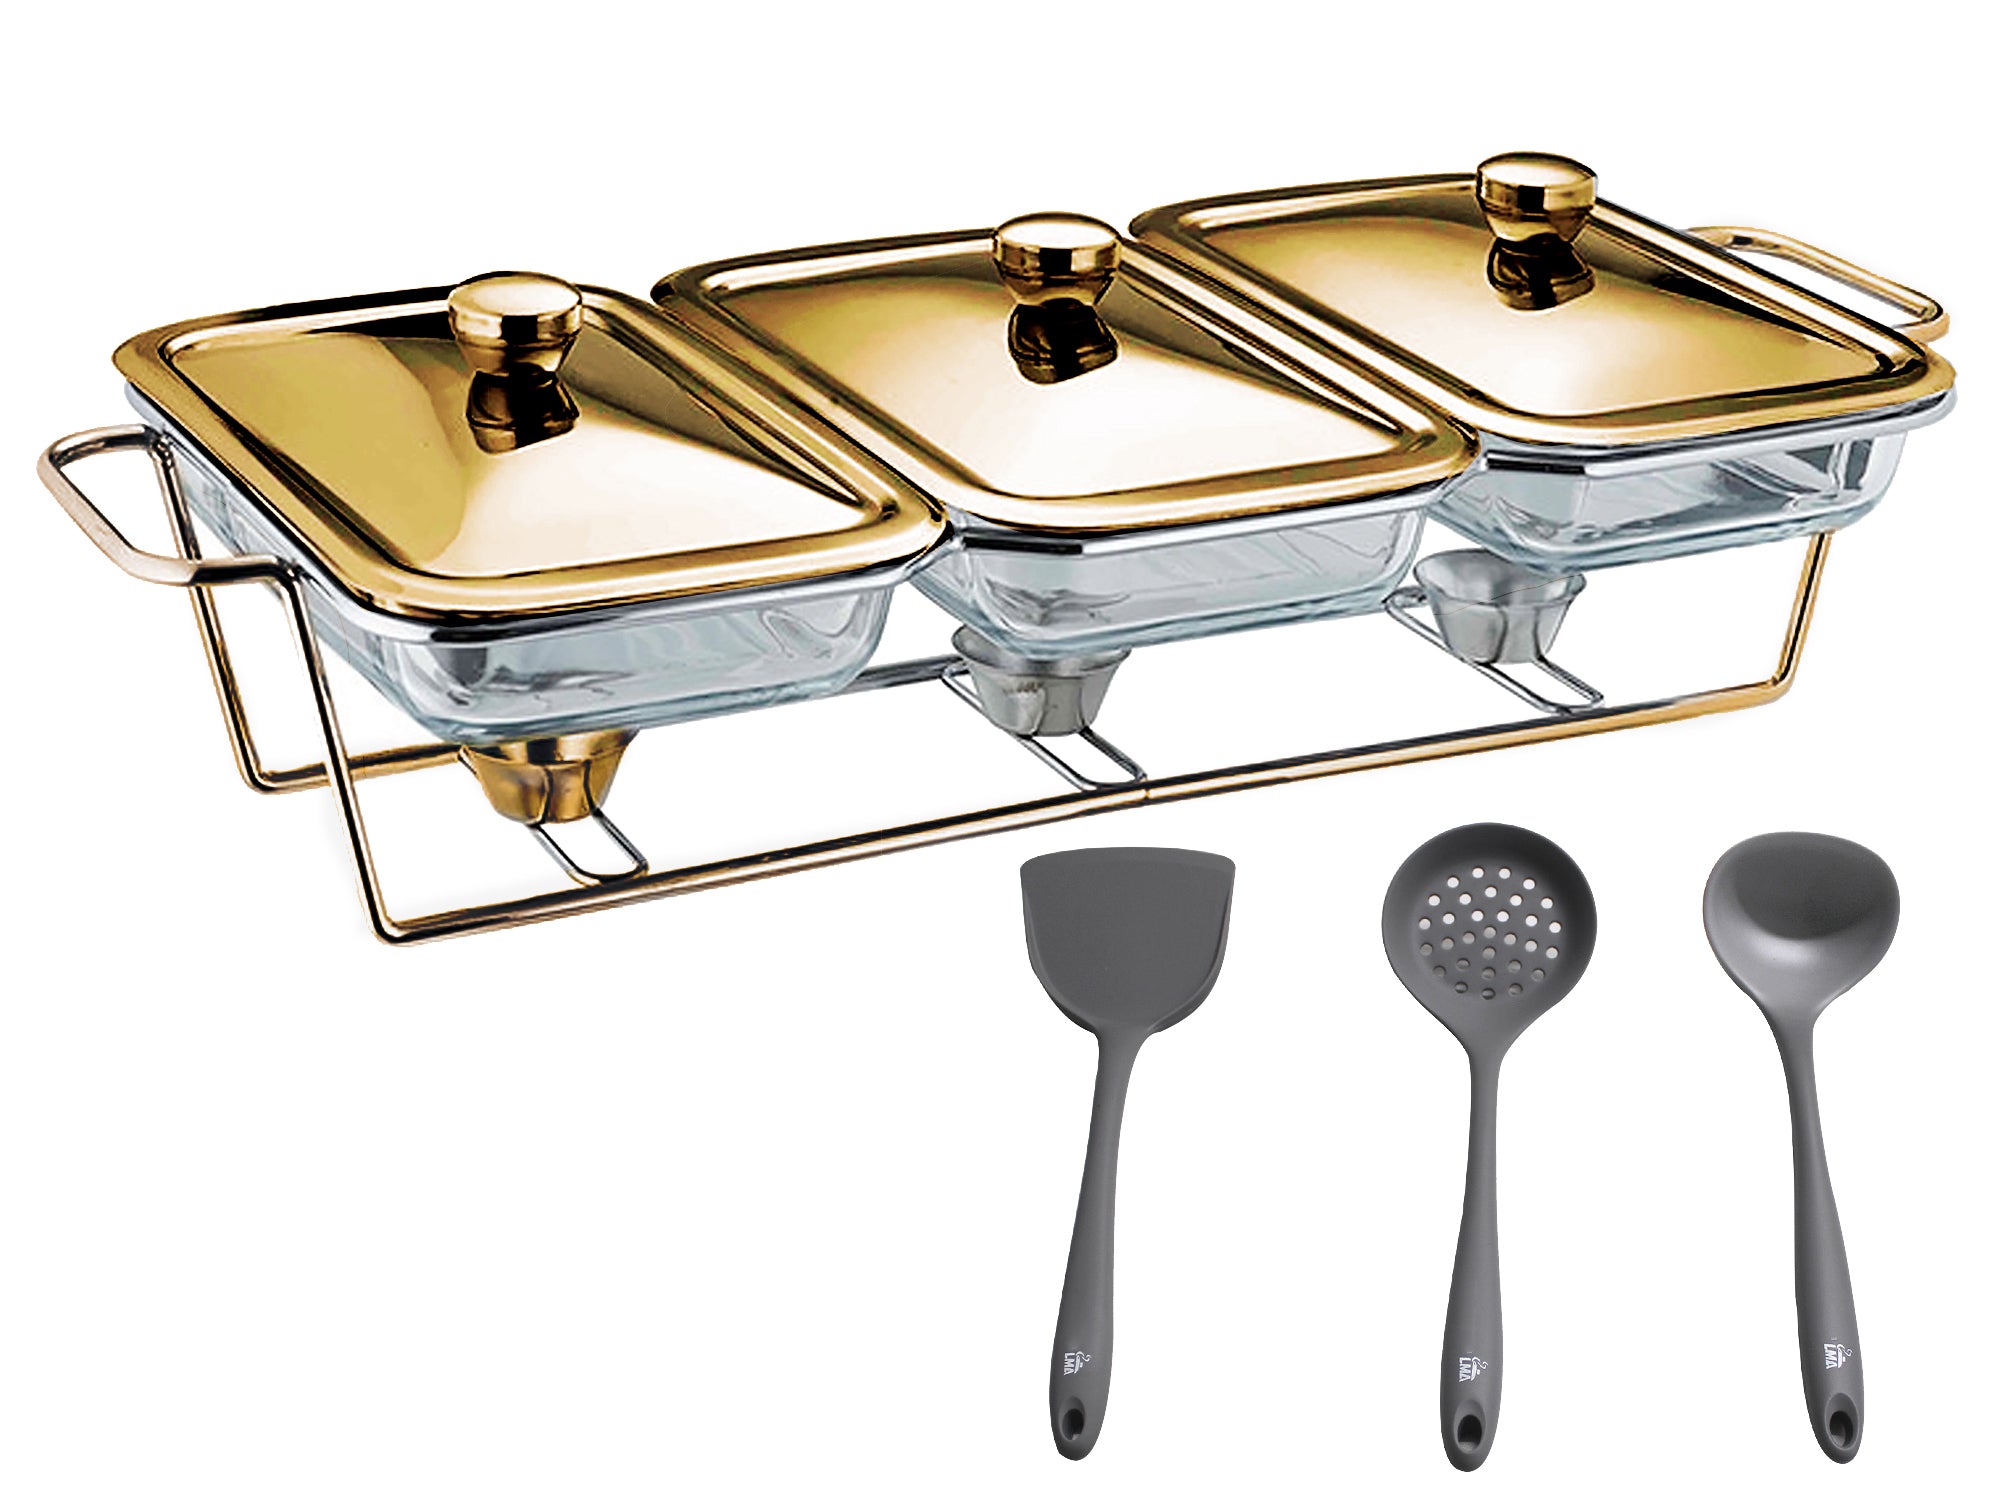 4.5 Liter Triple Pan Glass Chafing Dish with Metal Frame Lids & Silicon Utensils